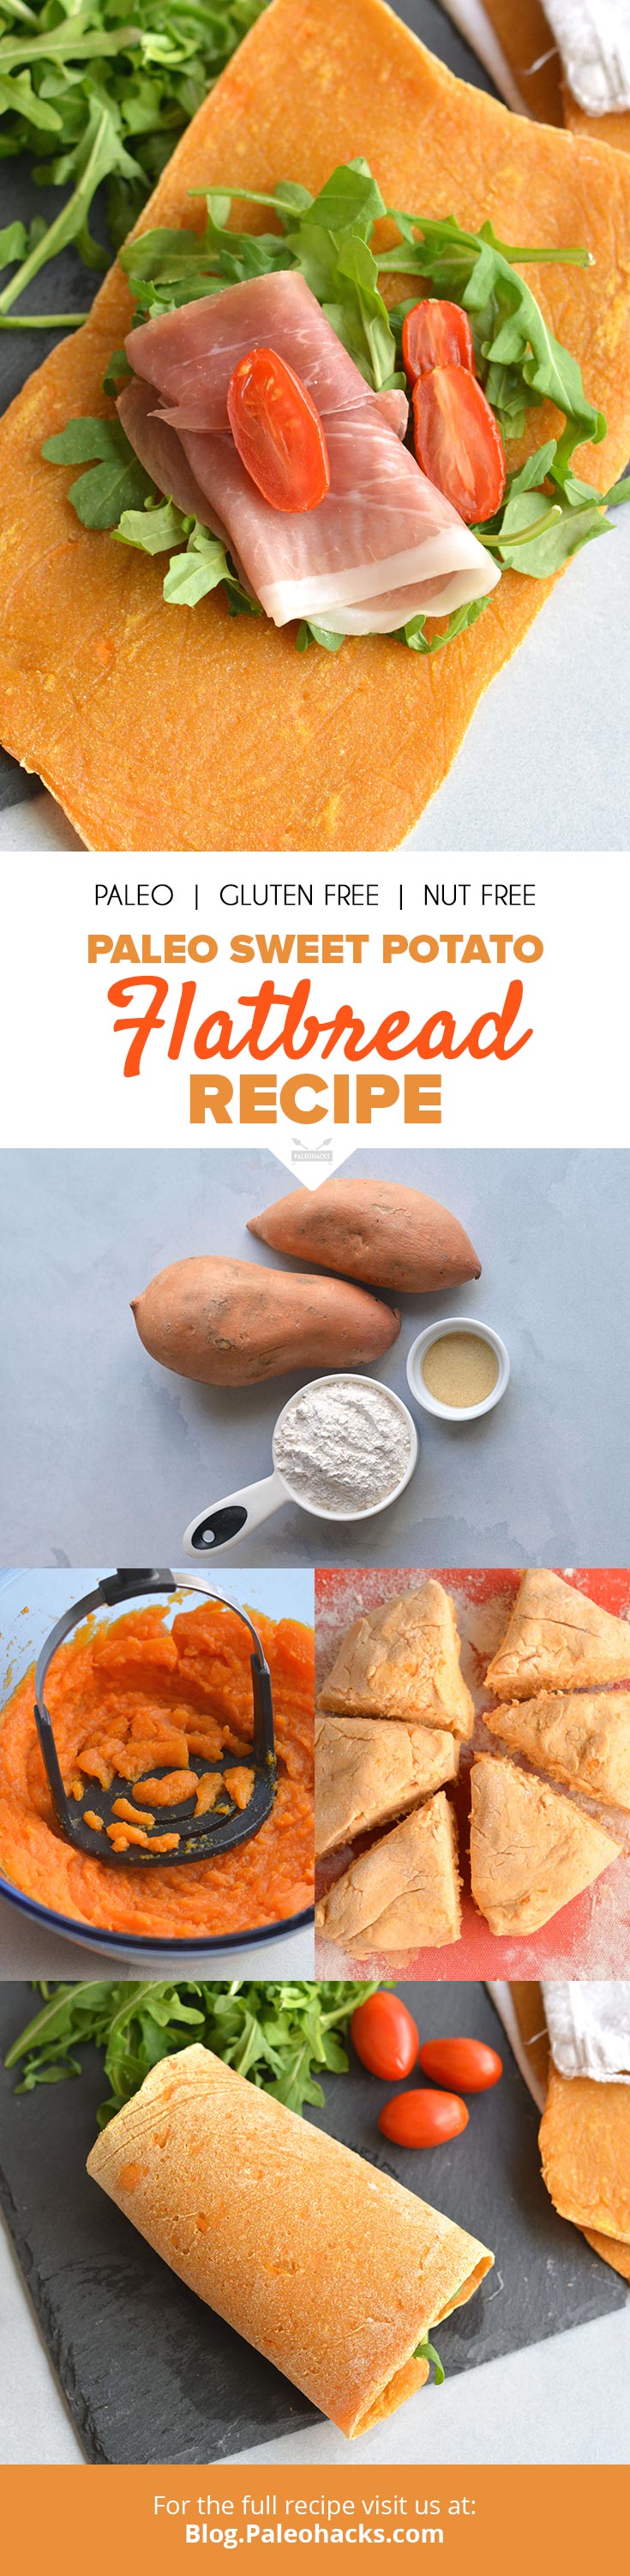 This 4-ingredient sweet potato flatbread is nut-free, dairy-free, and gluten-free for an allergy-friendly recipe. Roll it up, dip it into hummus or pile it high with your favorite pizza toppings!